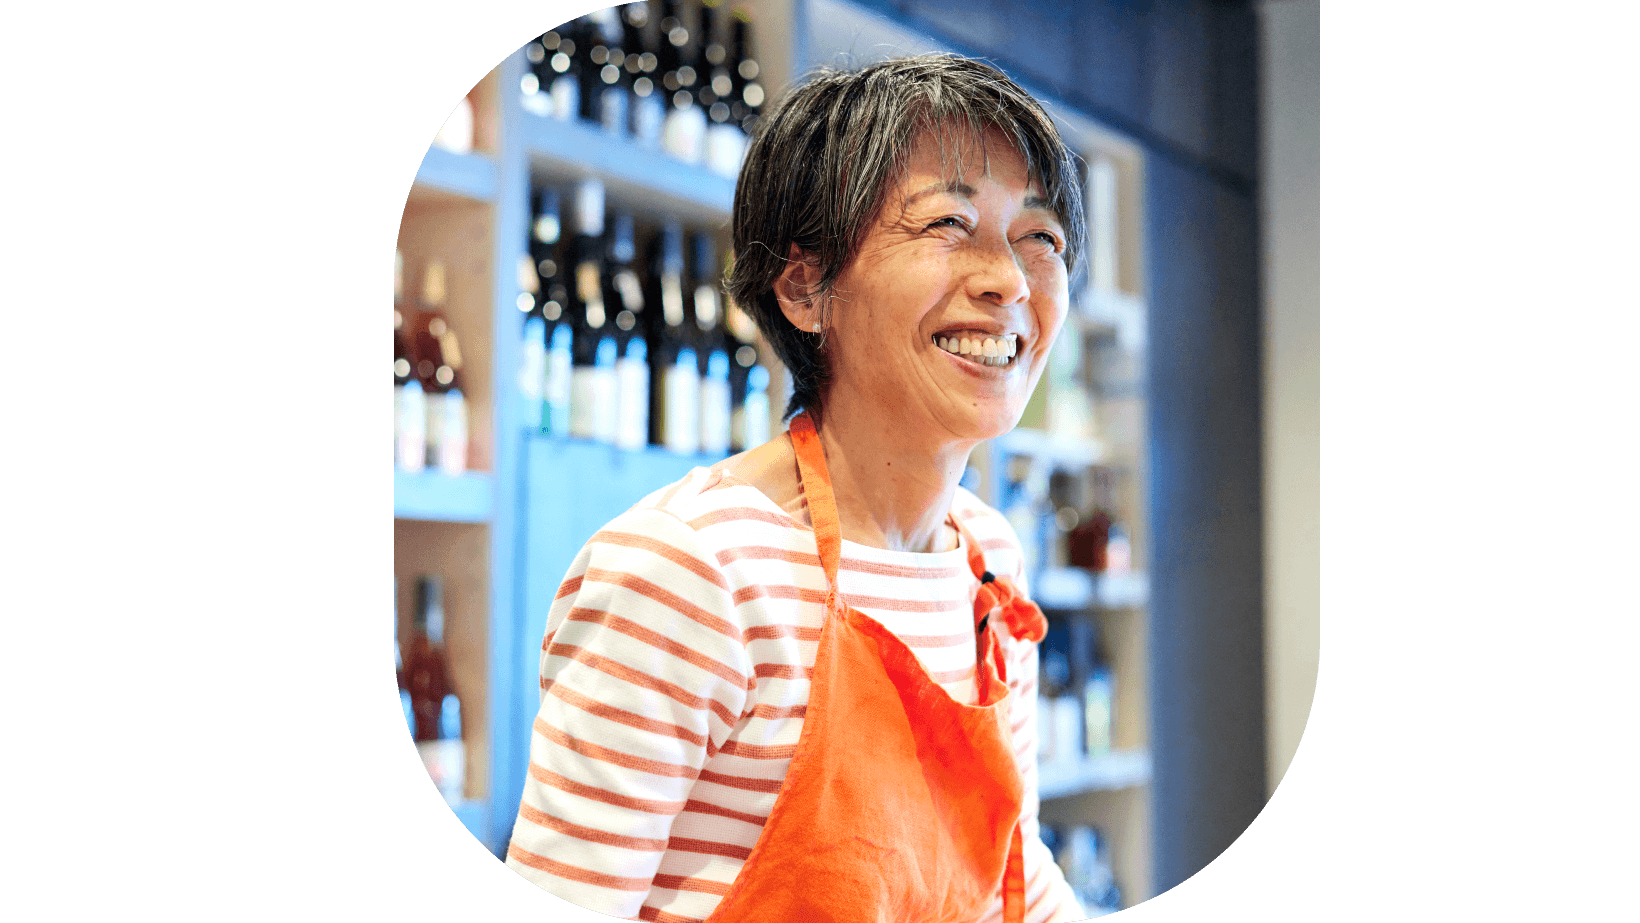 A woman worker with a smile in a wine shop